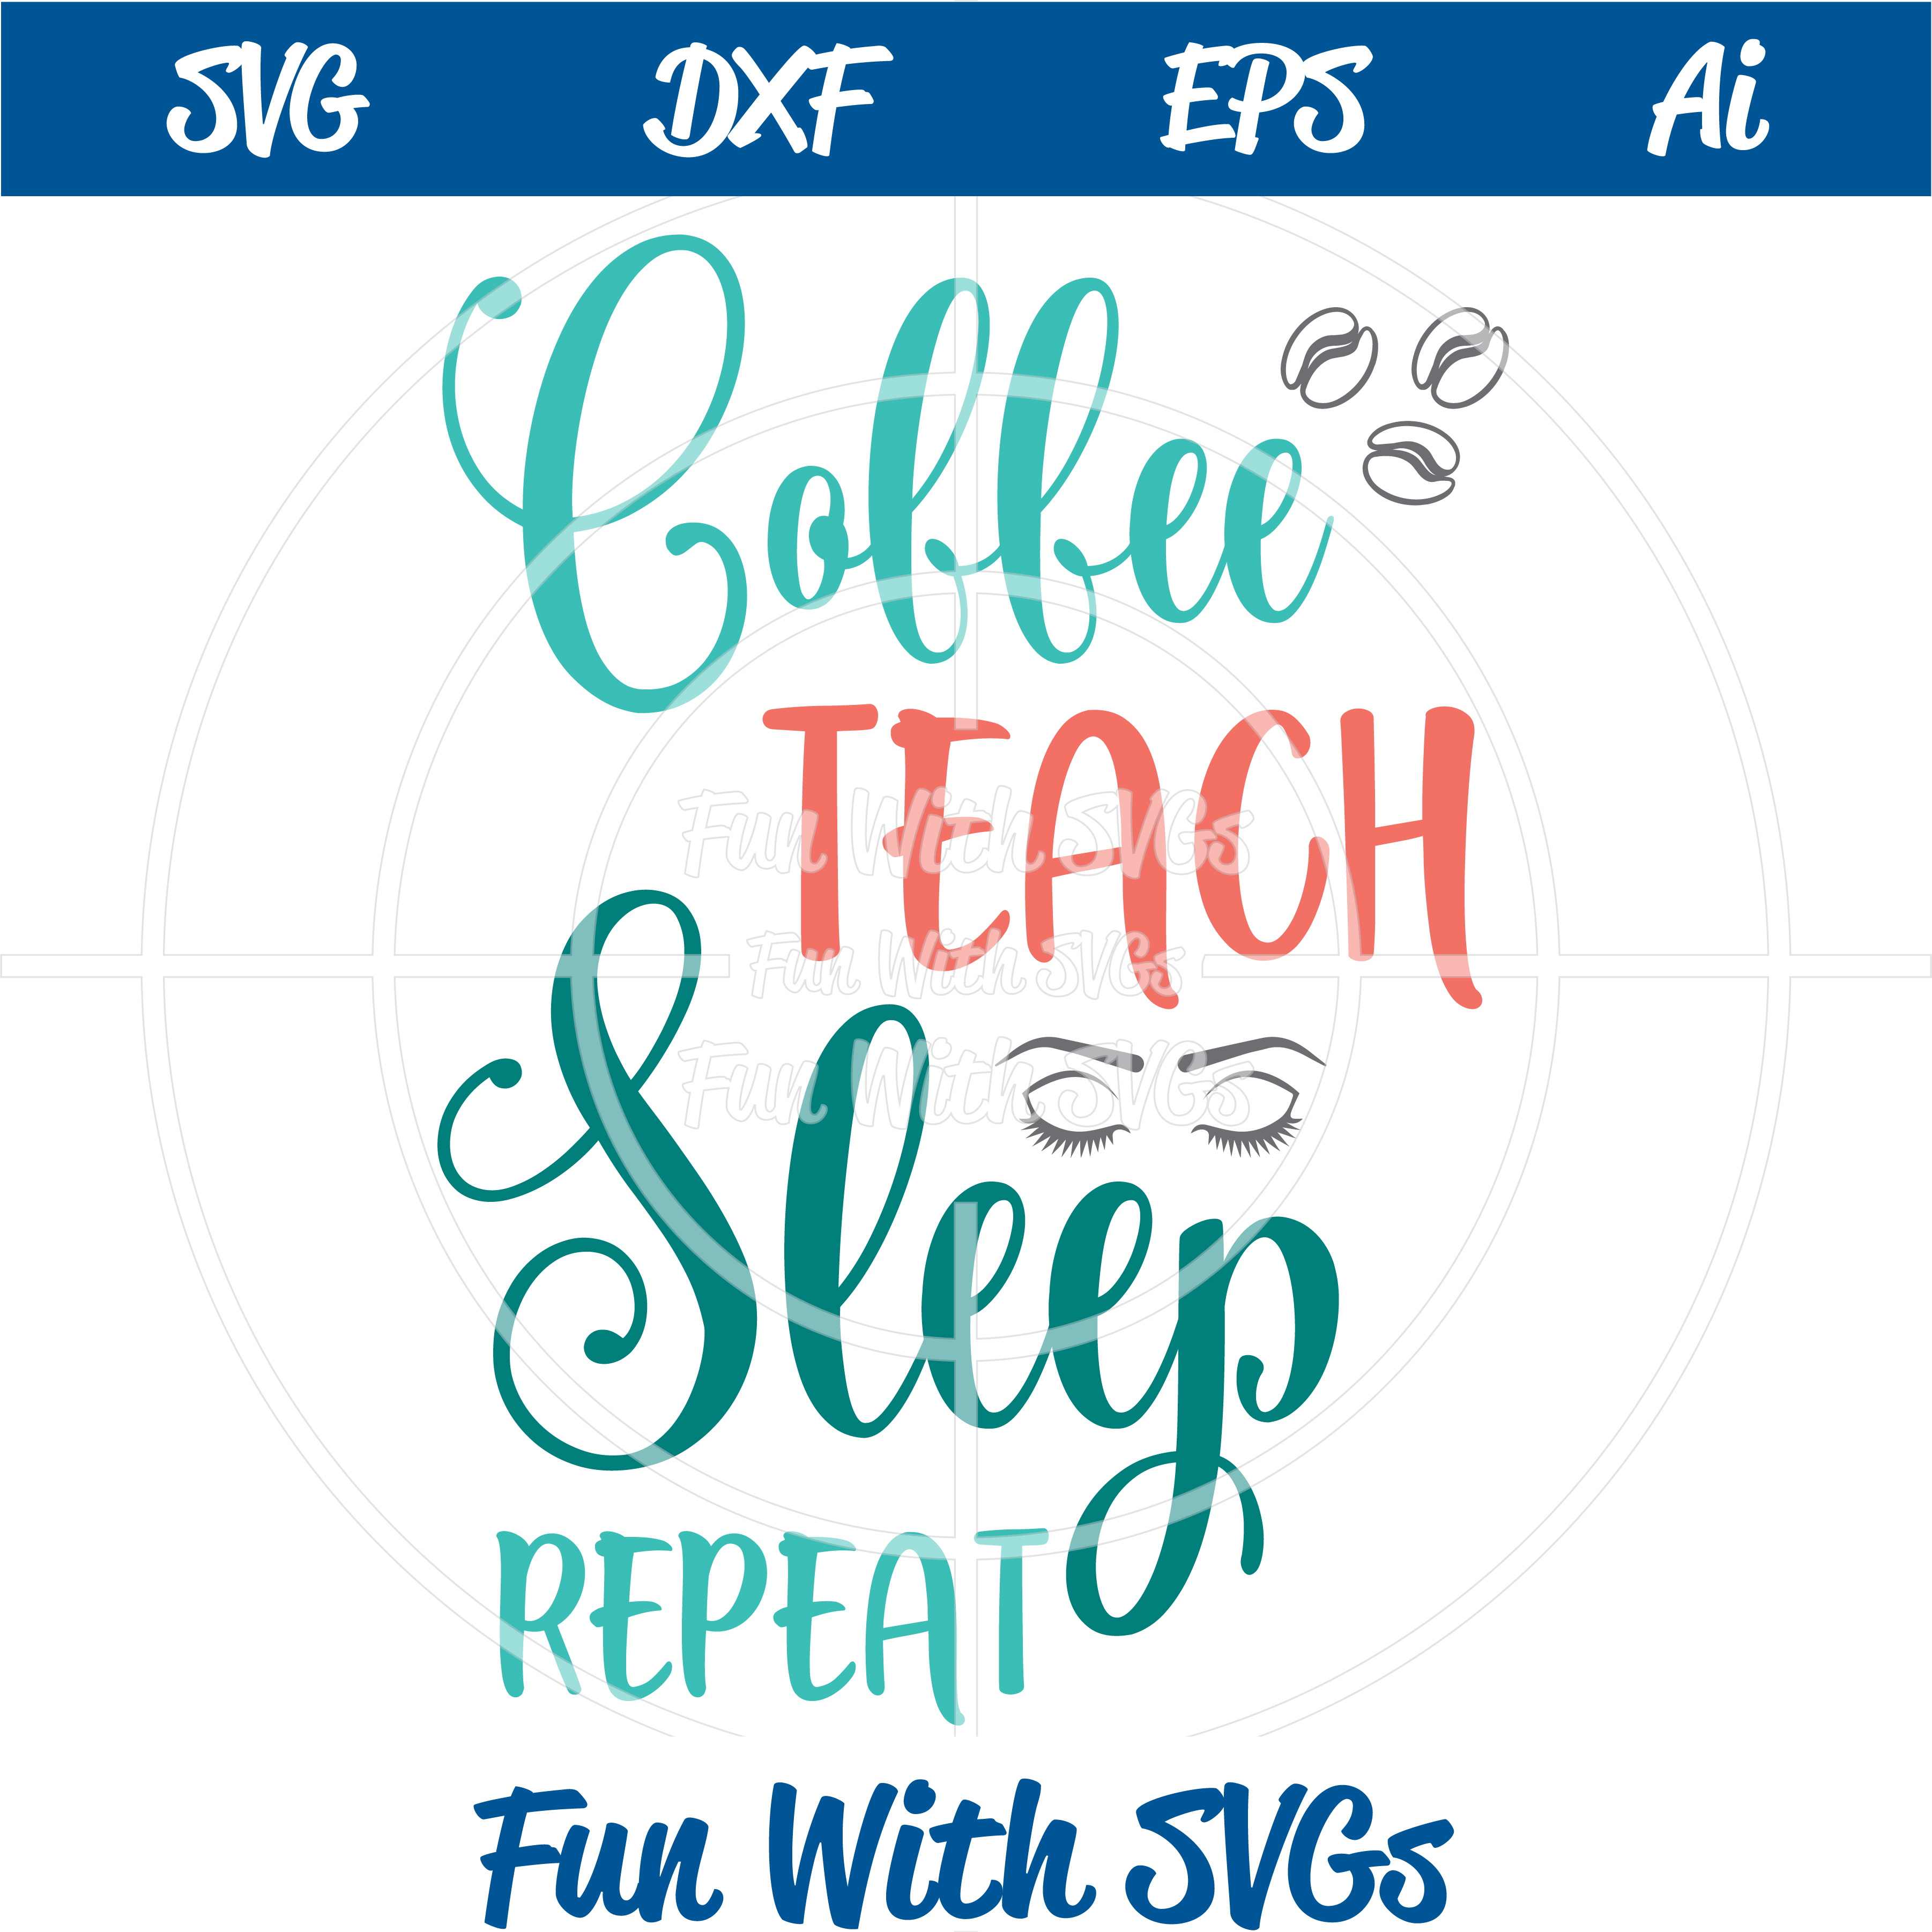 Free Free Coffee Teach Repeat Svg 599 SVG PNG EPS DXF File